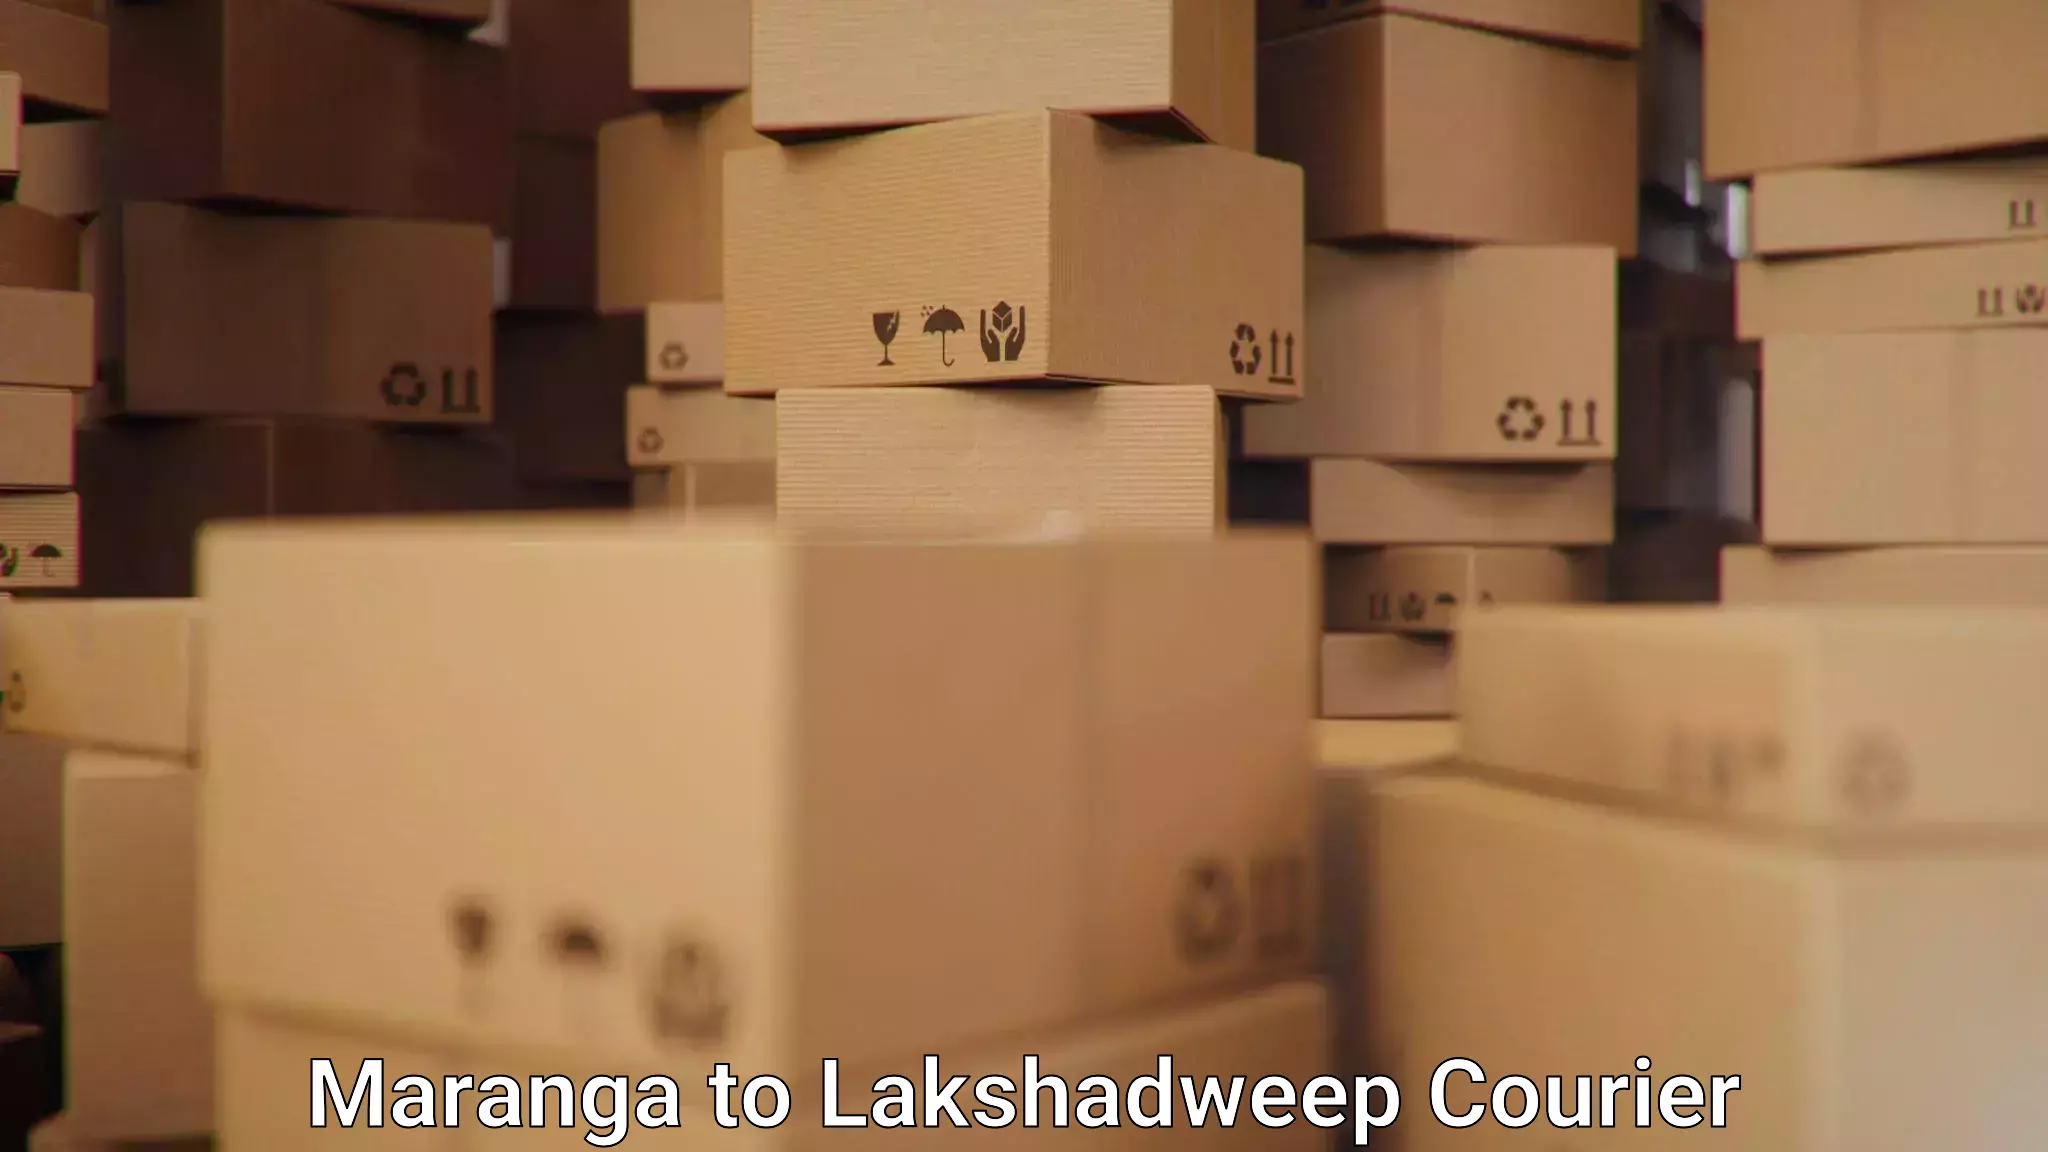 Residential courier service Maranga to Lakshadweep